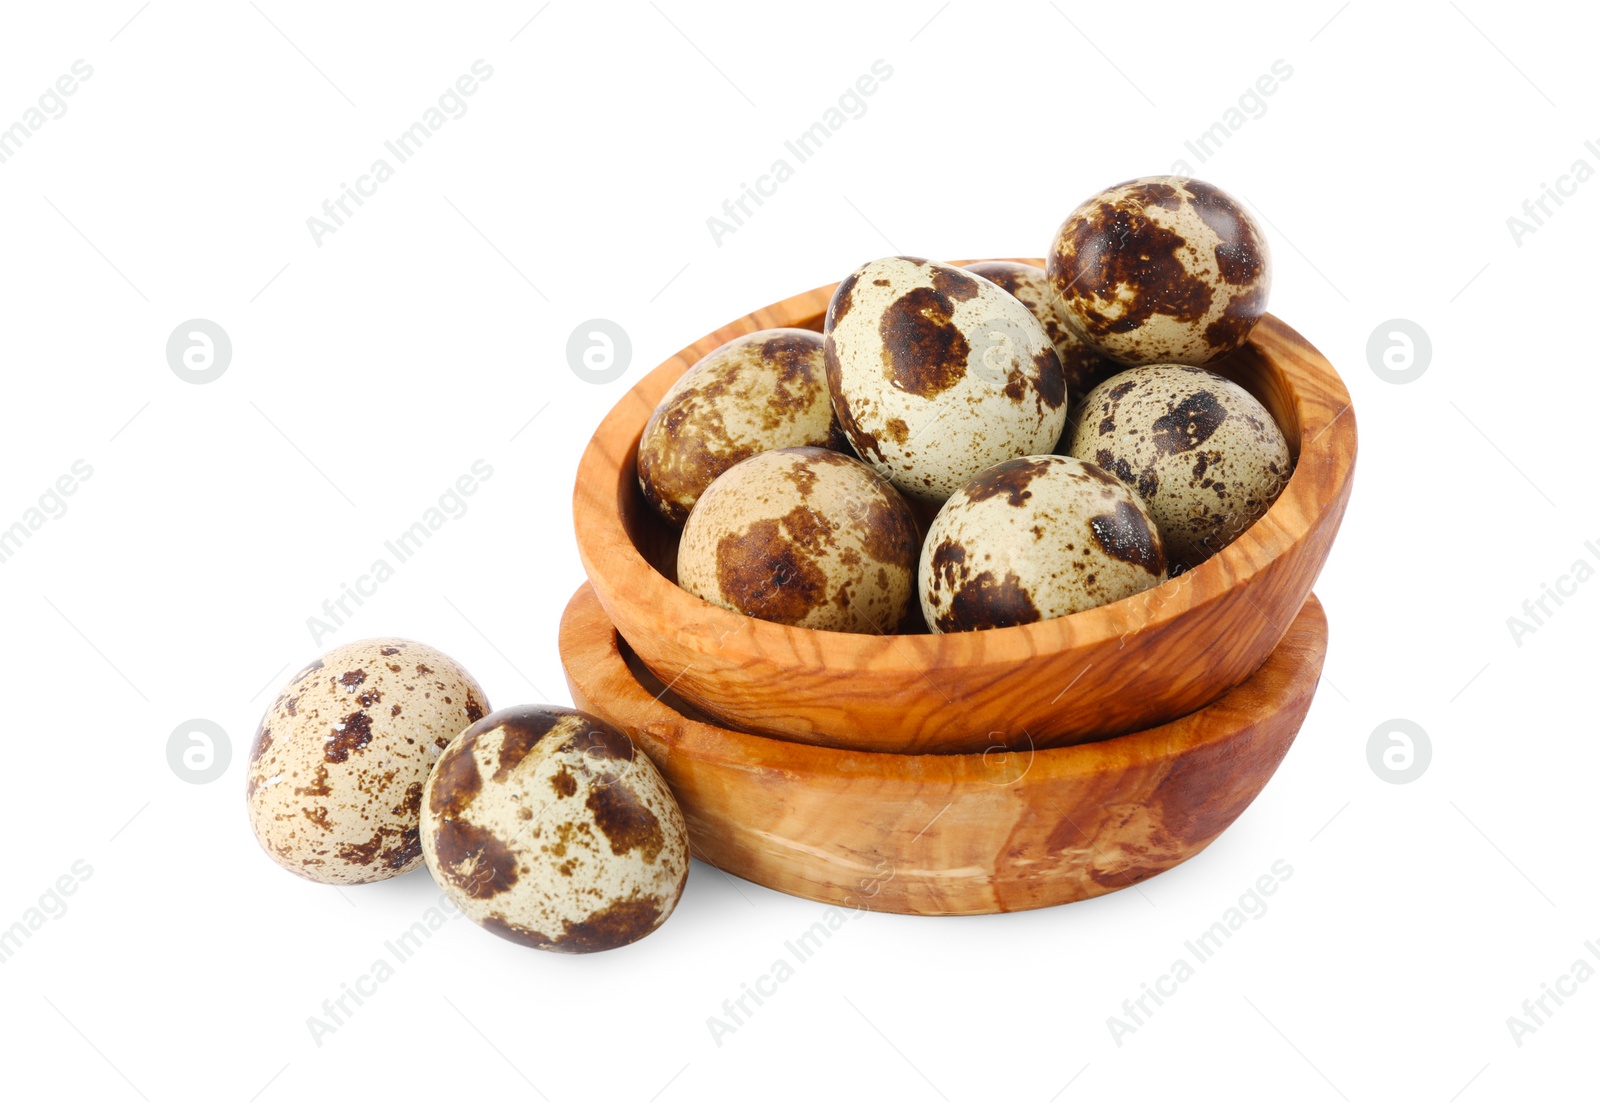 Photo of Wooden bowls and quail eggs on white background